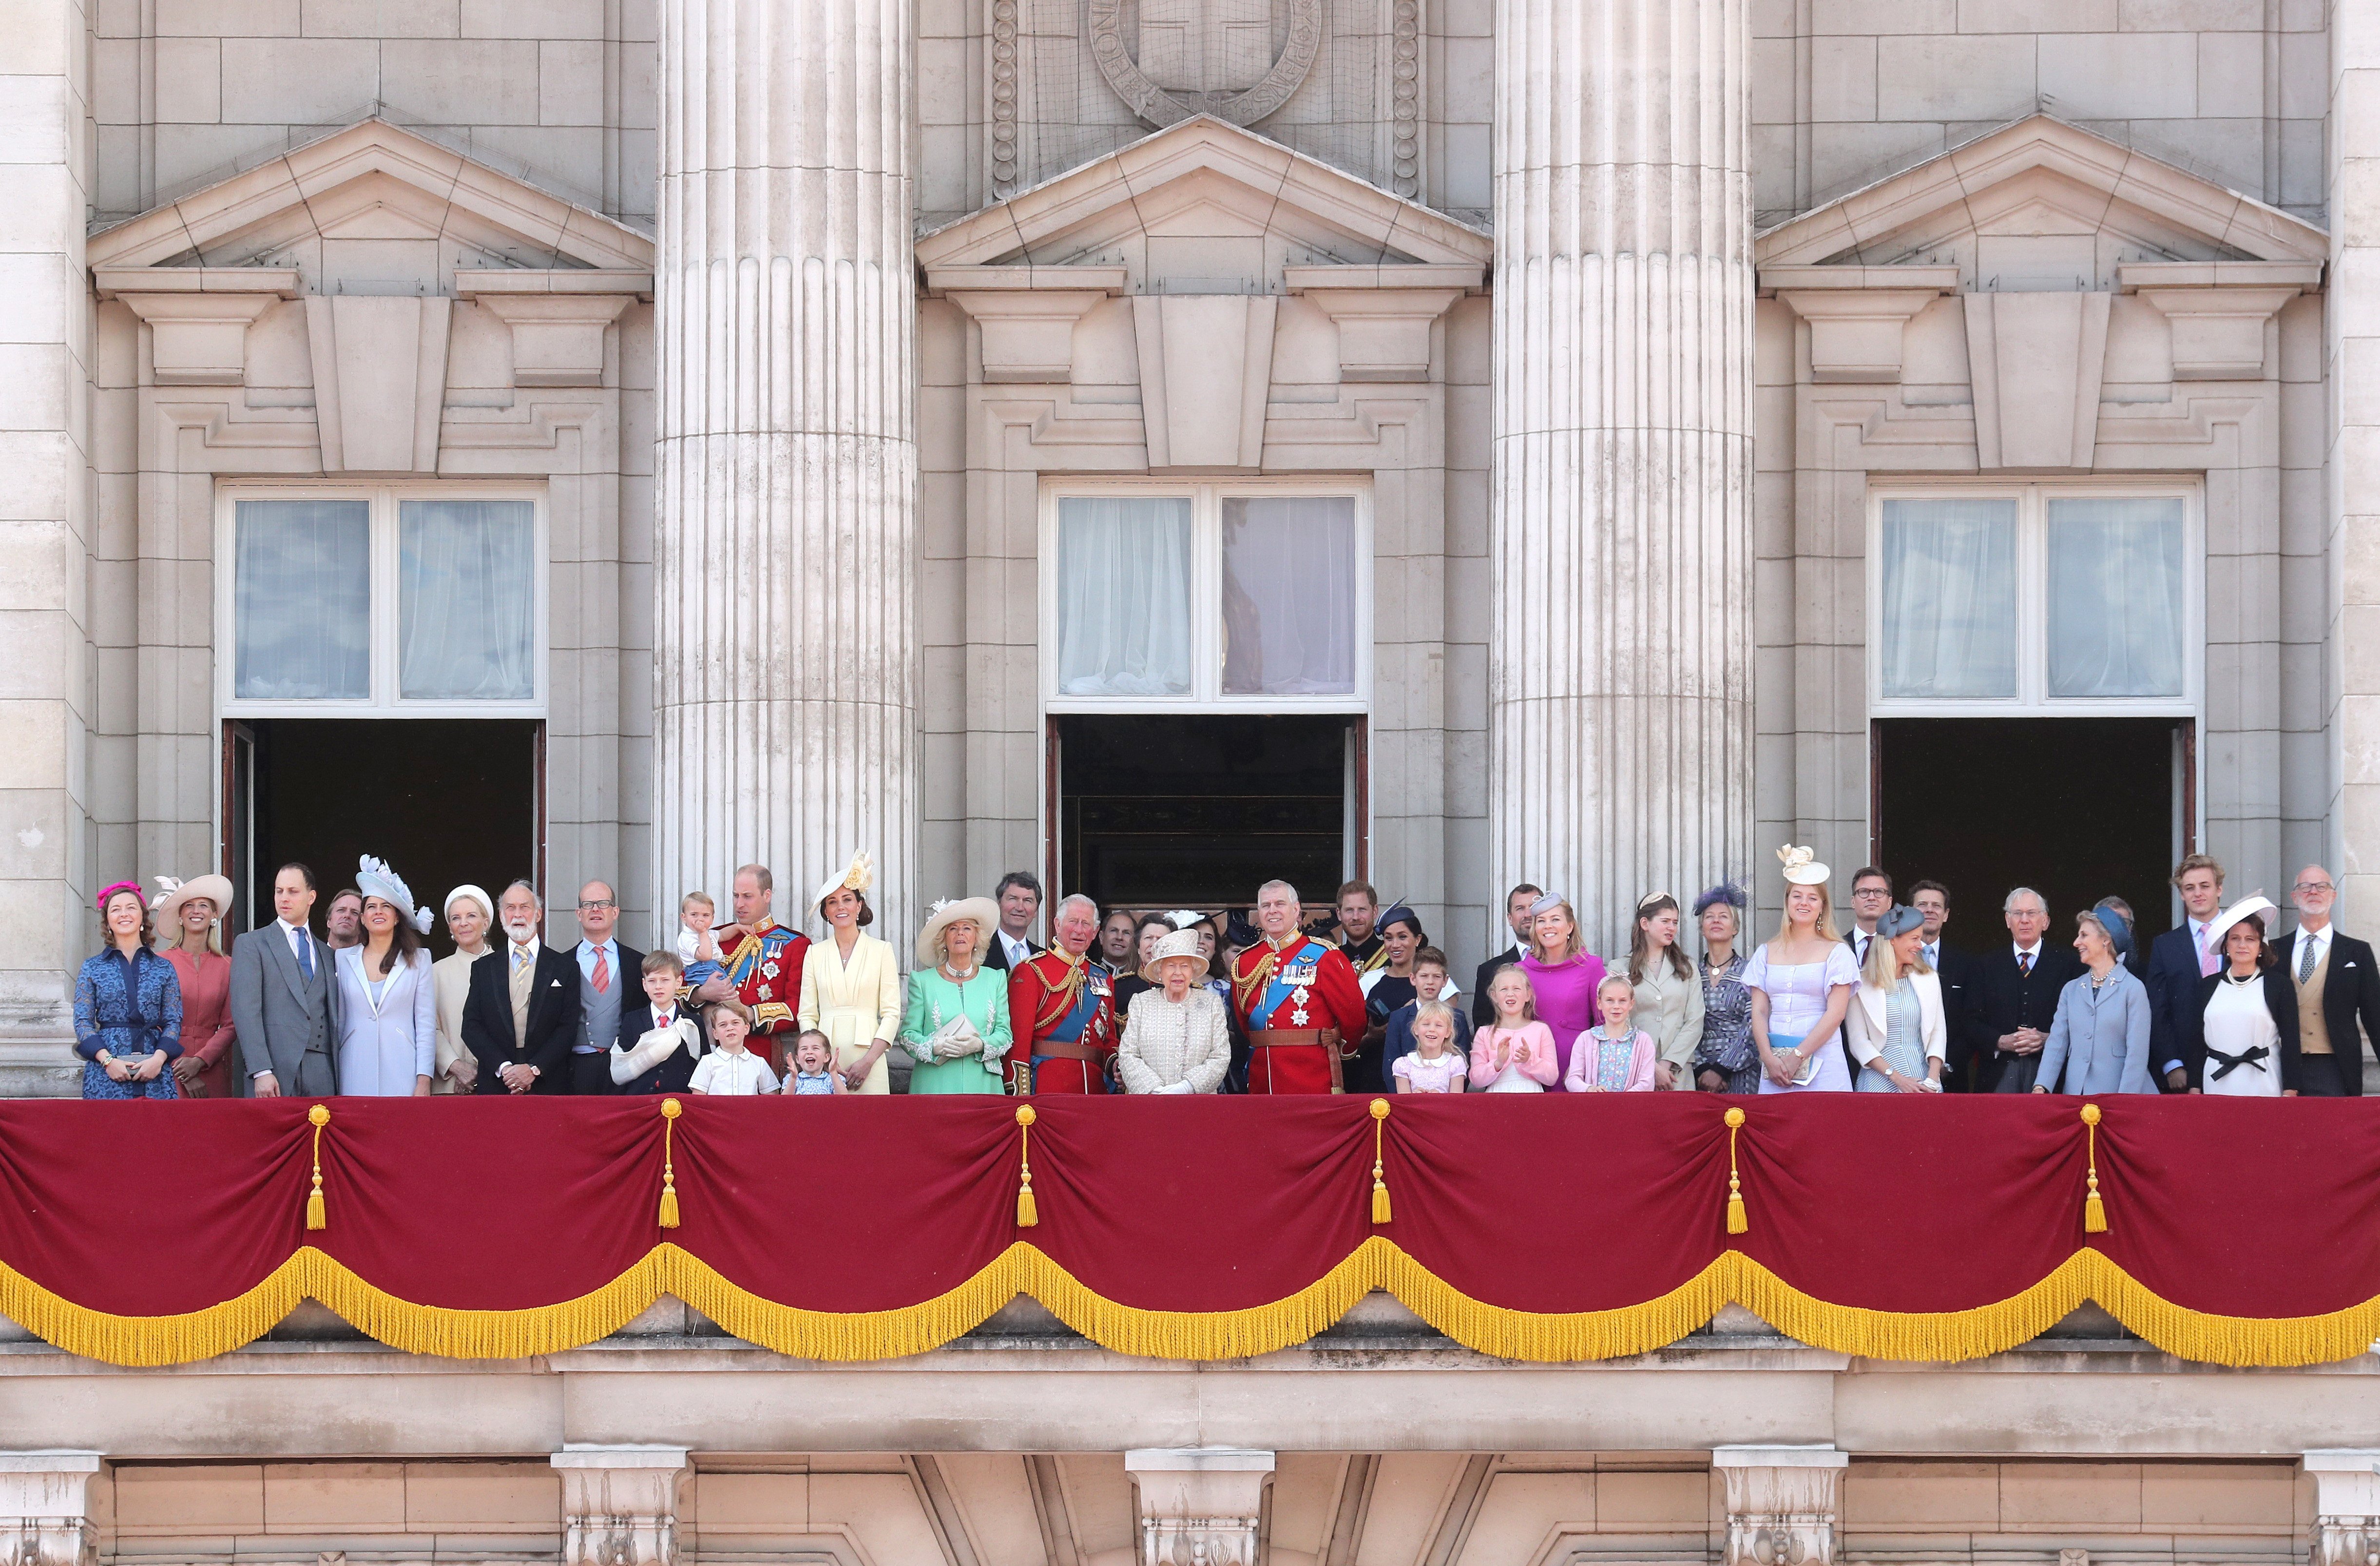 The Royal Family on the balcony of Buckingham Palace during the Queen's annual birthday parade | Getty Images